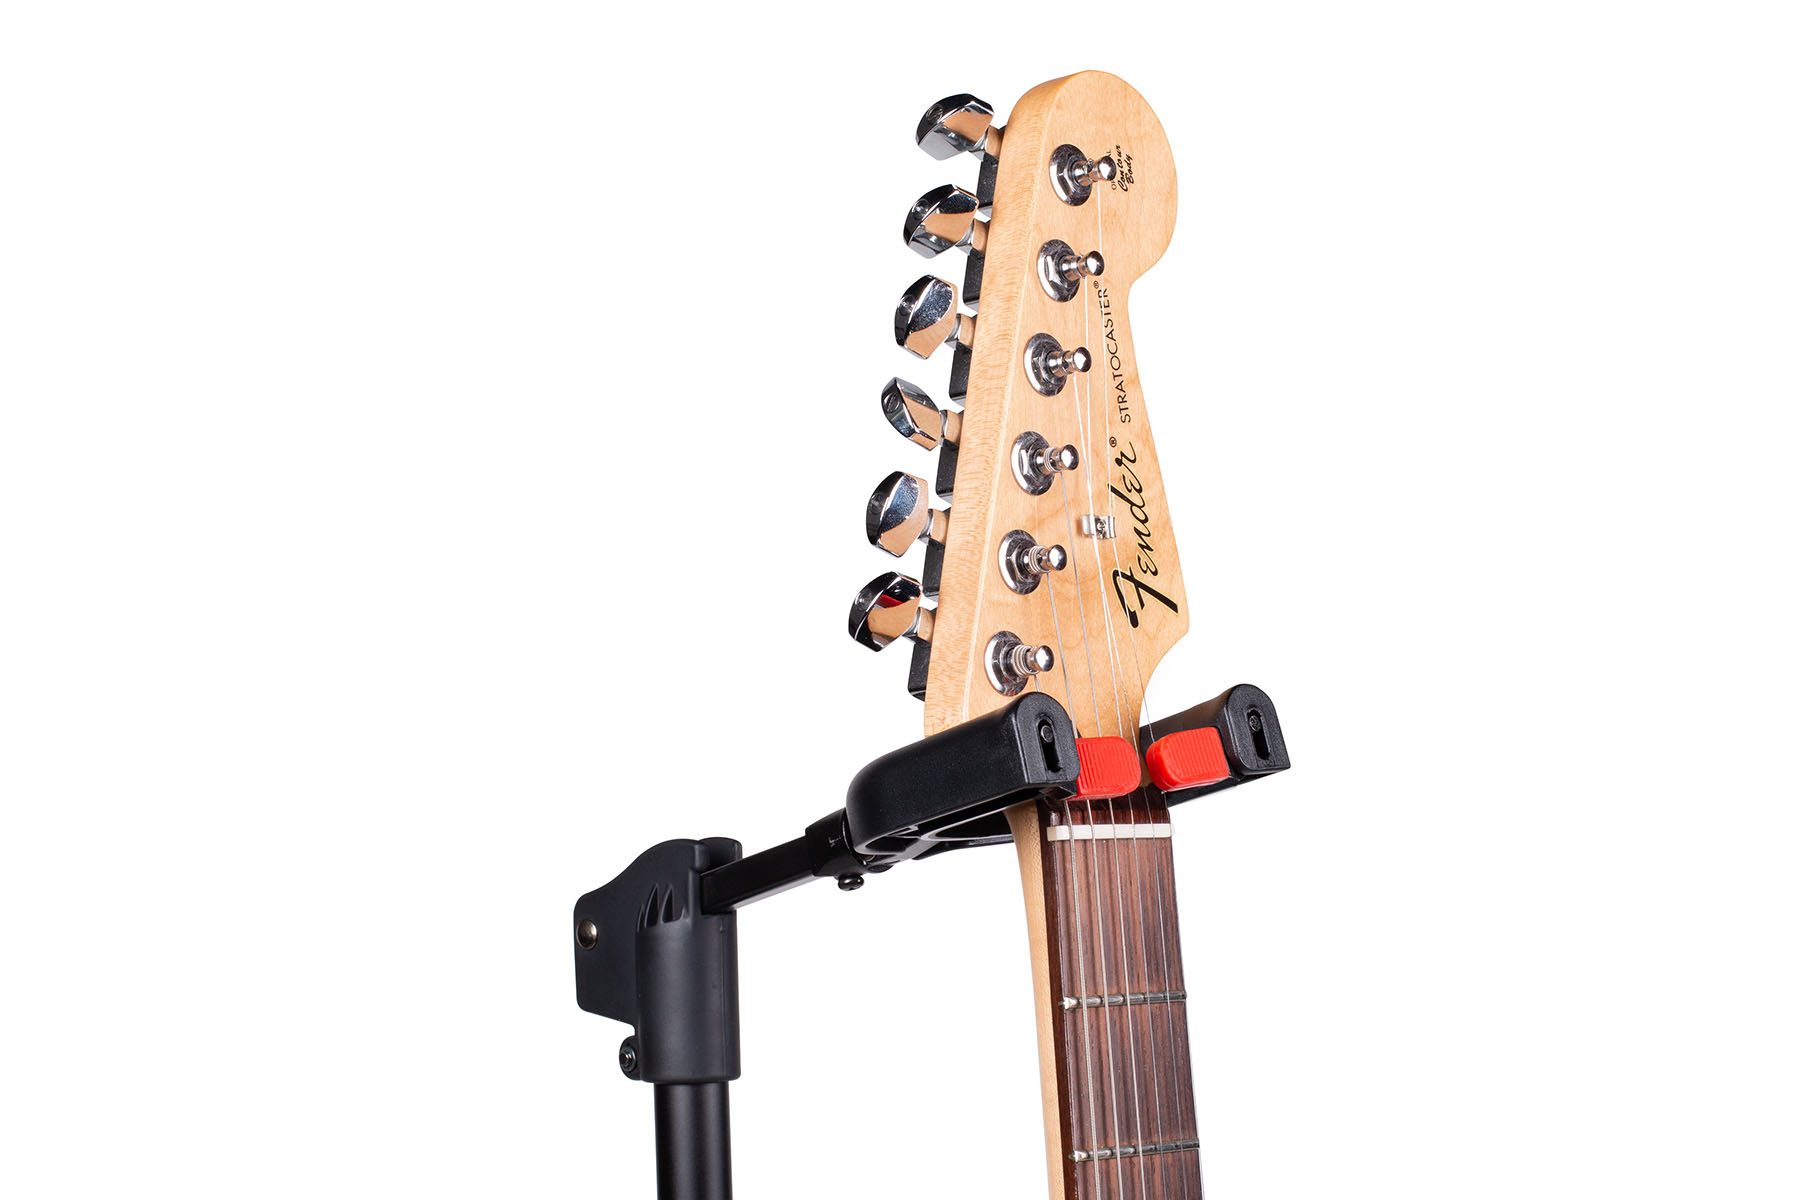 Hanging Guitar Stand with Locking Neck Cradle-GFW-GTR-1500